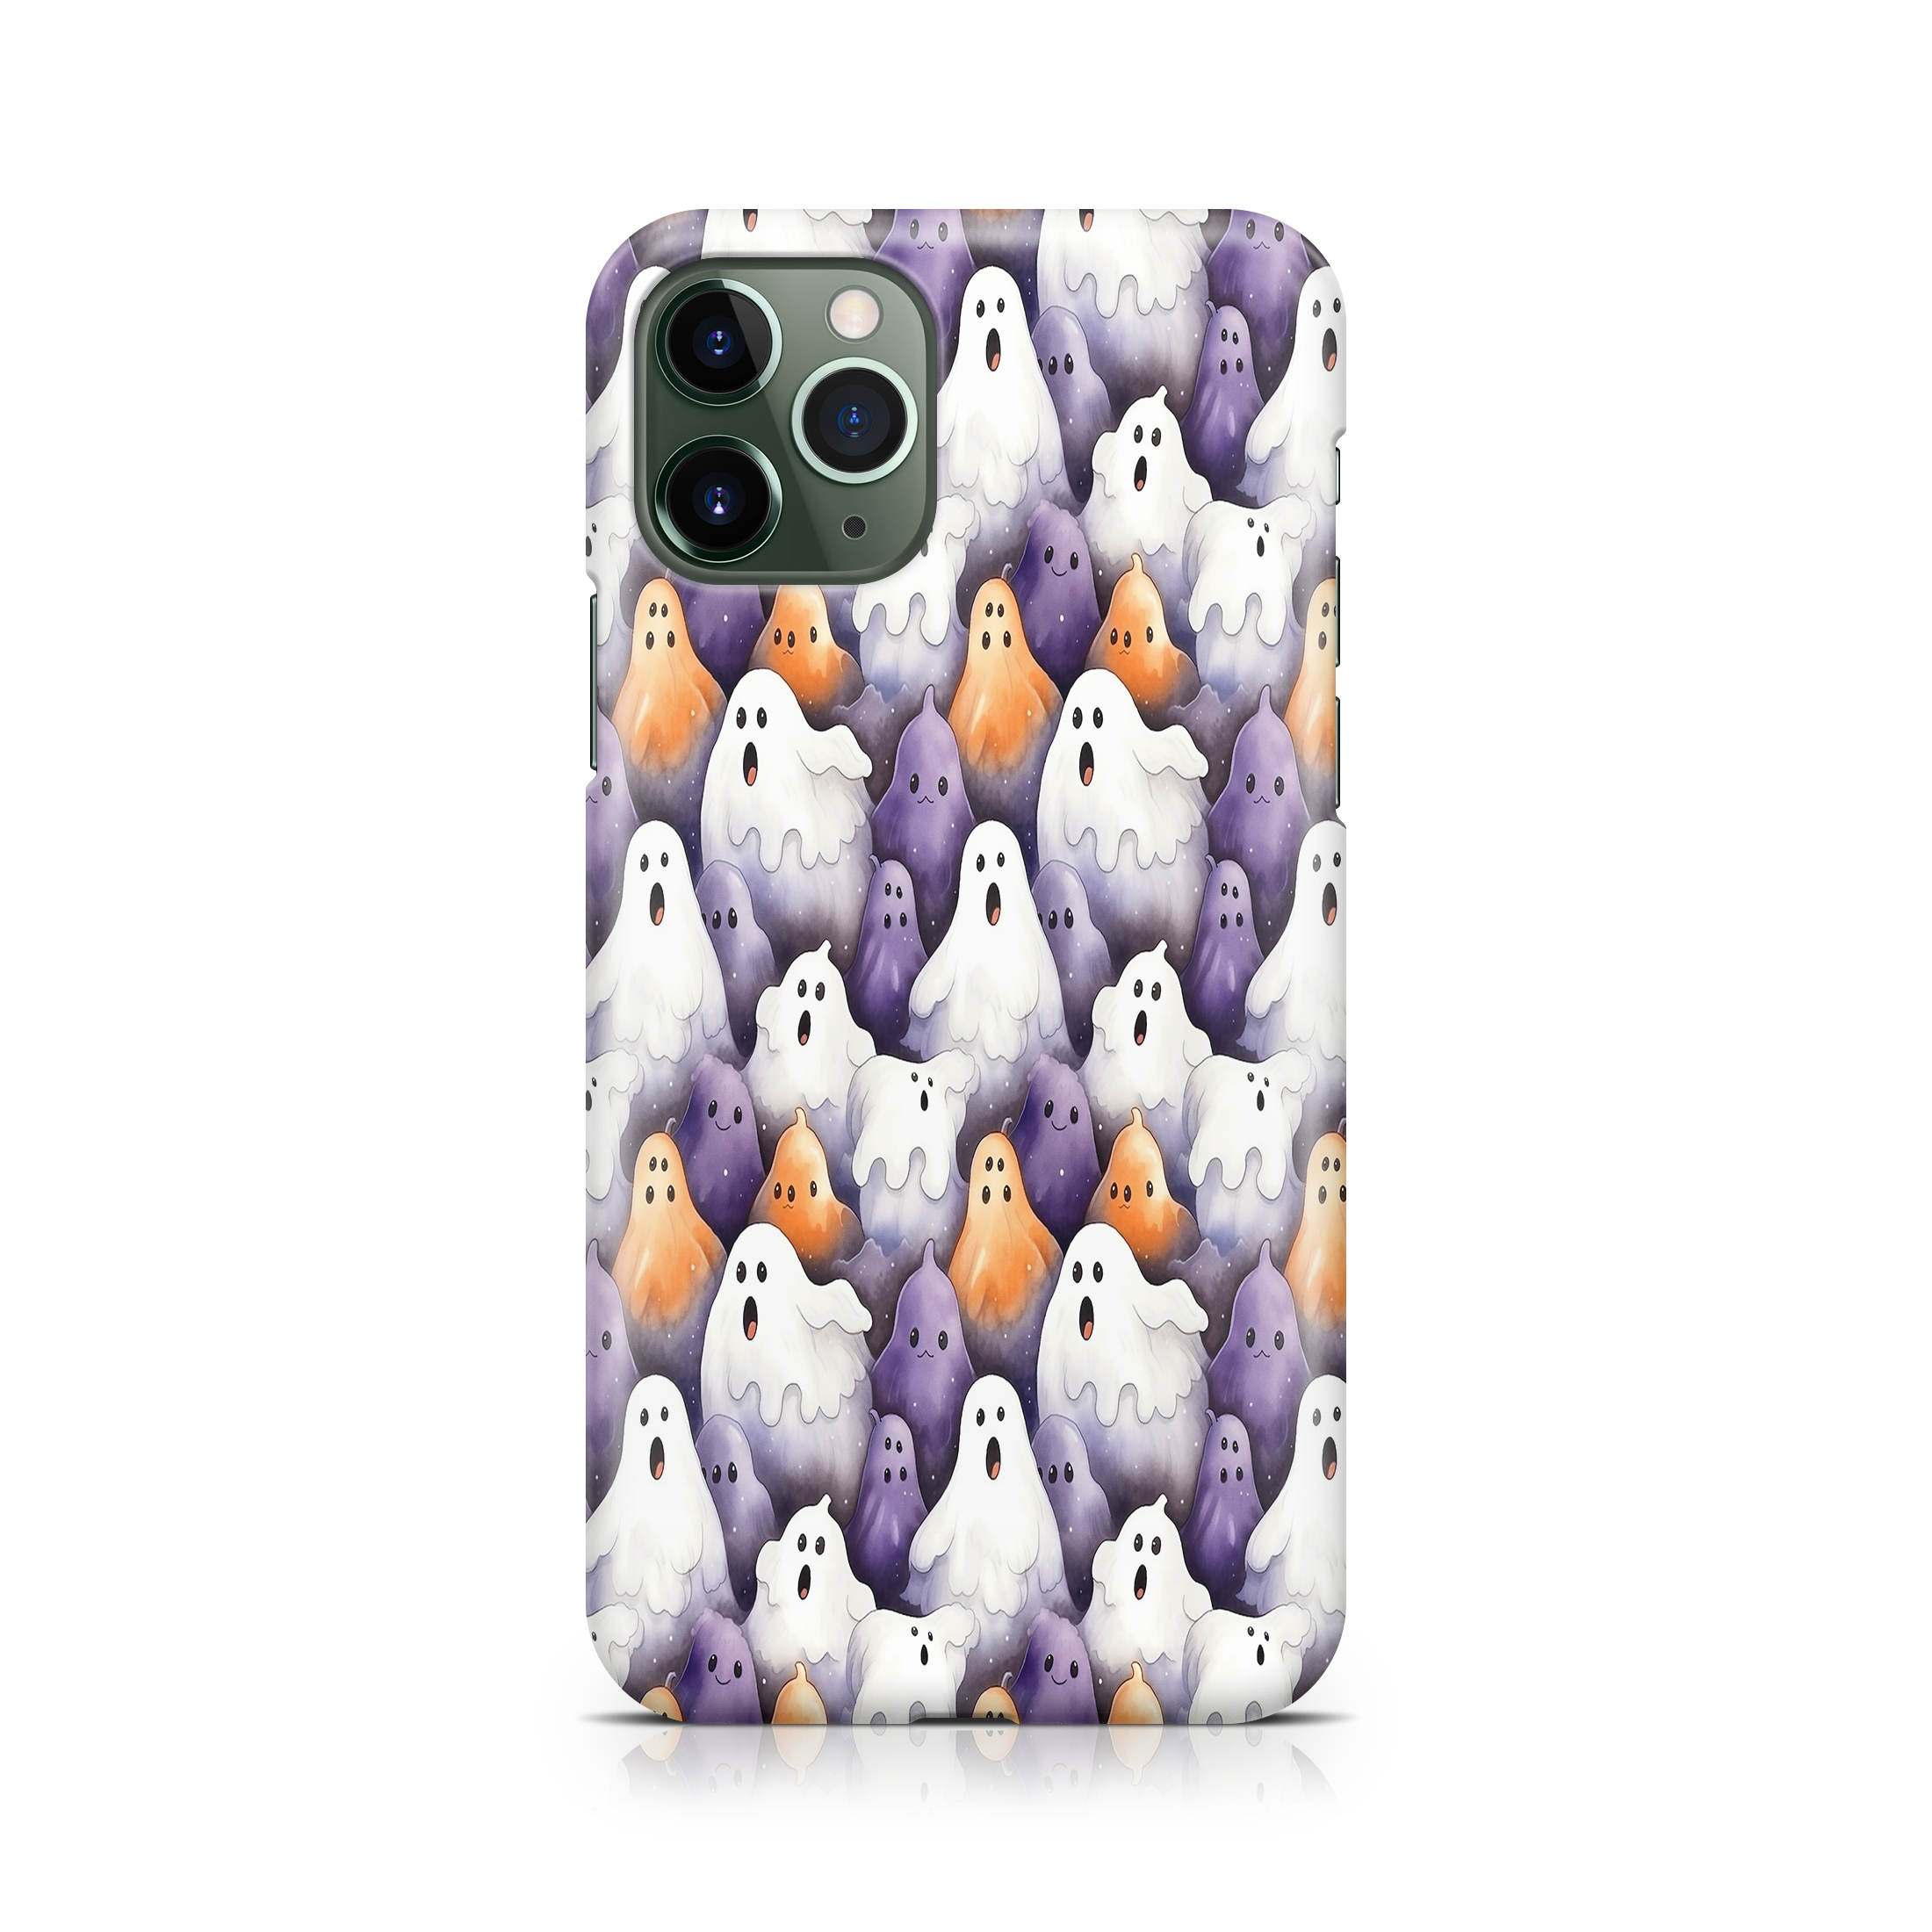 Spooky Ghosts - iPhone phone case designs by CaseSwagger